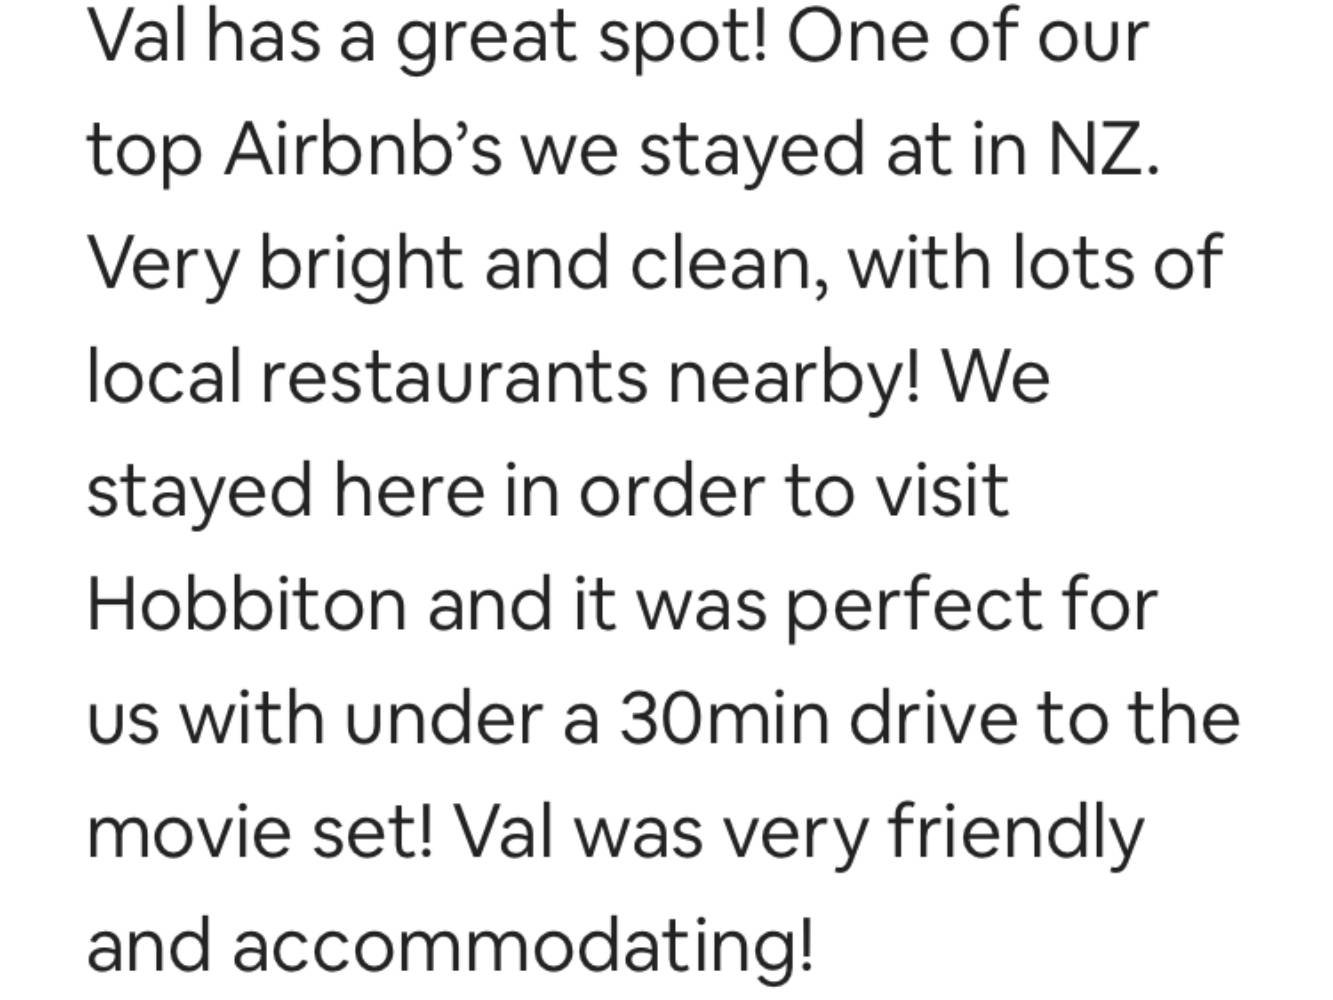 Review from Airbnb guests